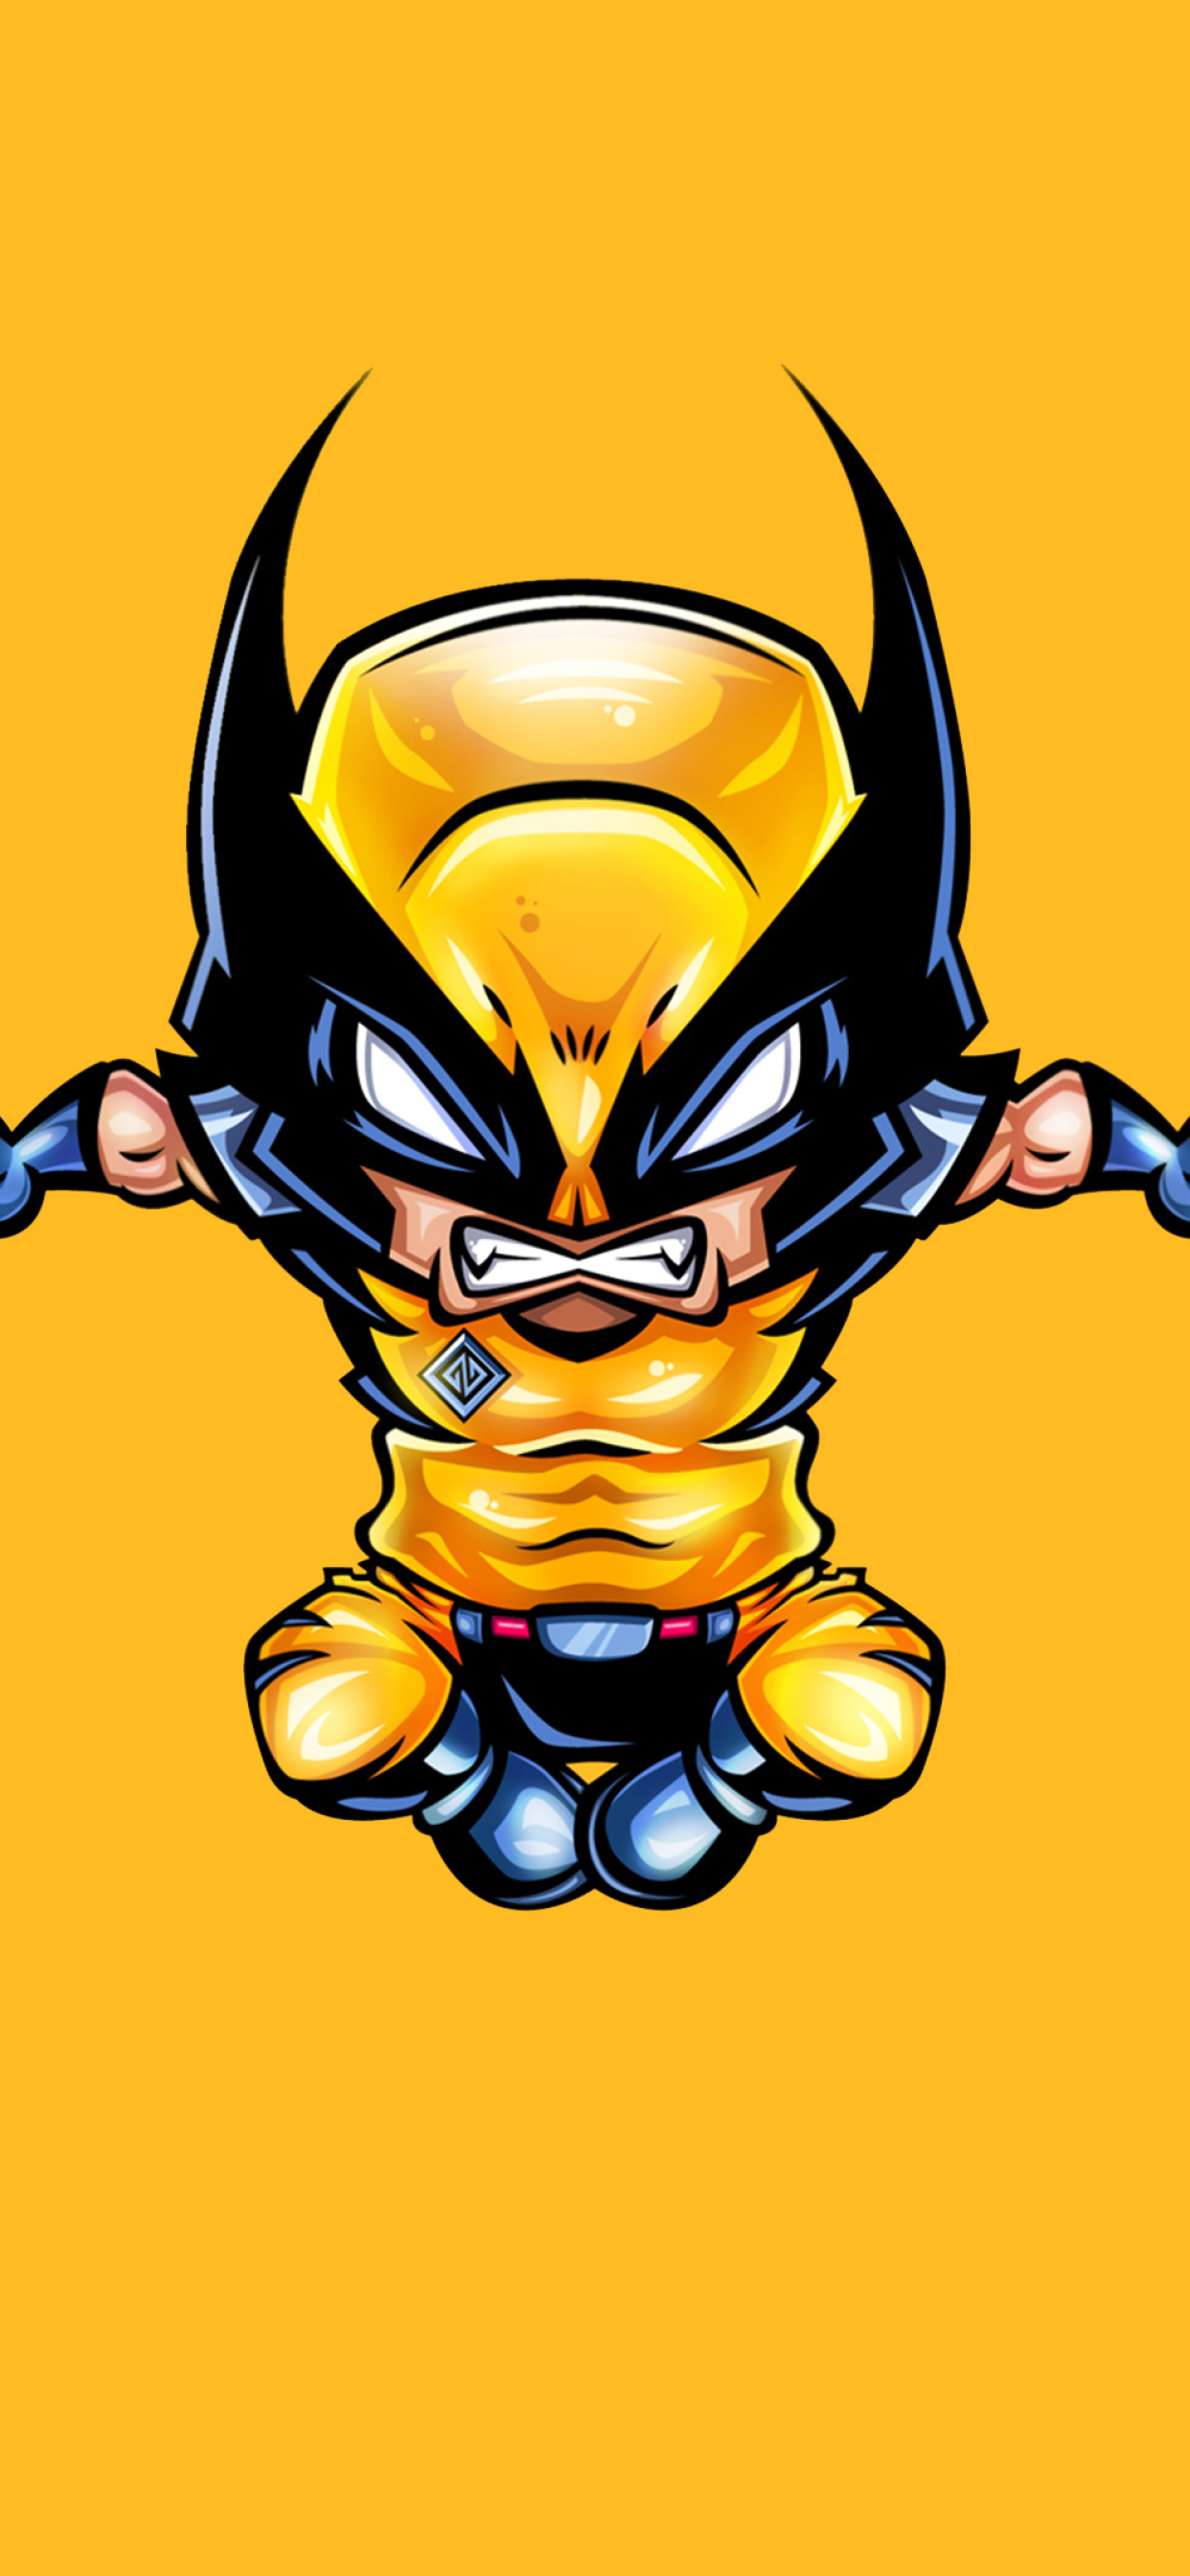 1242x26 Wolverine Minimal Iphone Xs Max Wallpaper Hd Superheroes 4k Wallpapers Images Photos And Background Wallpapers Den